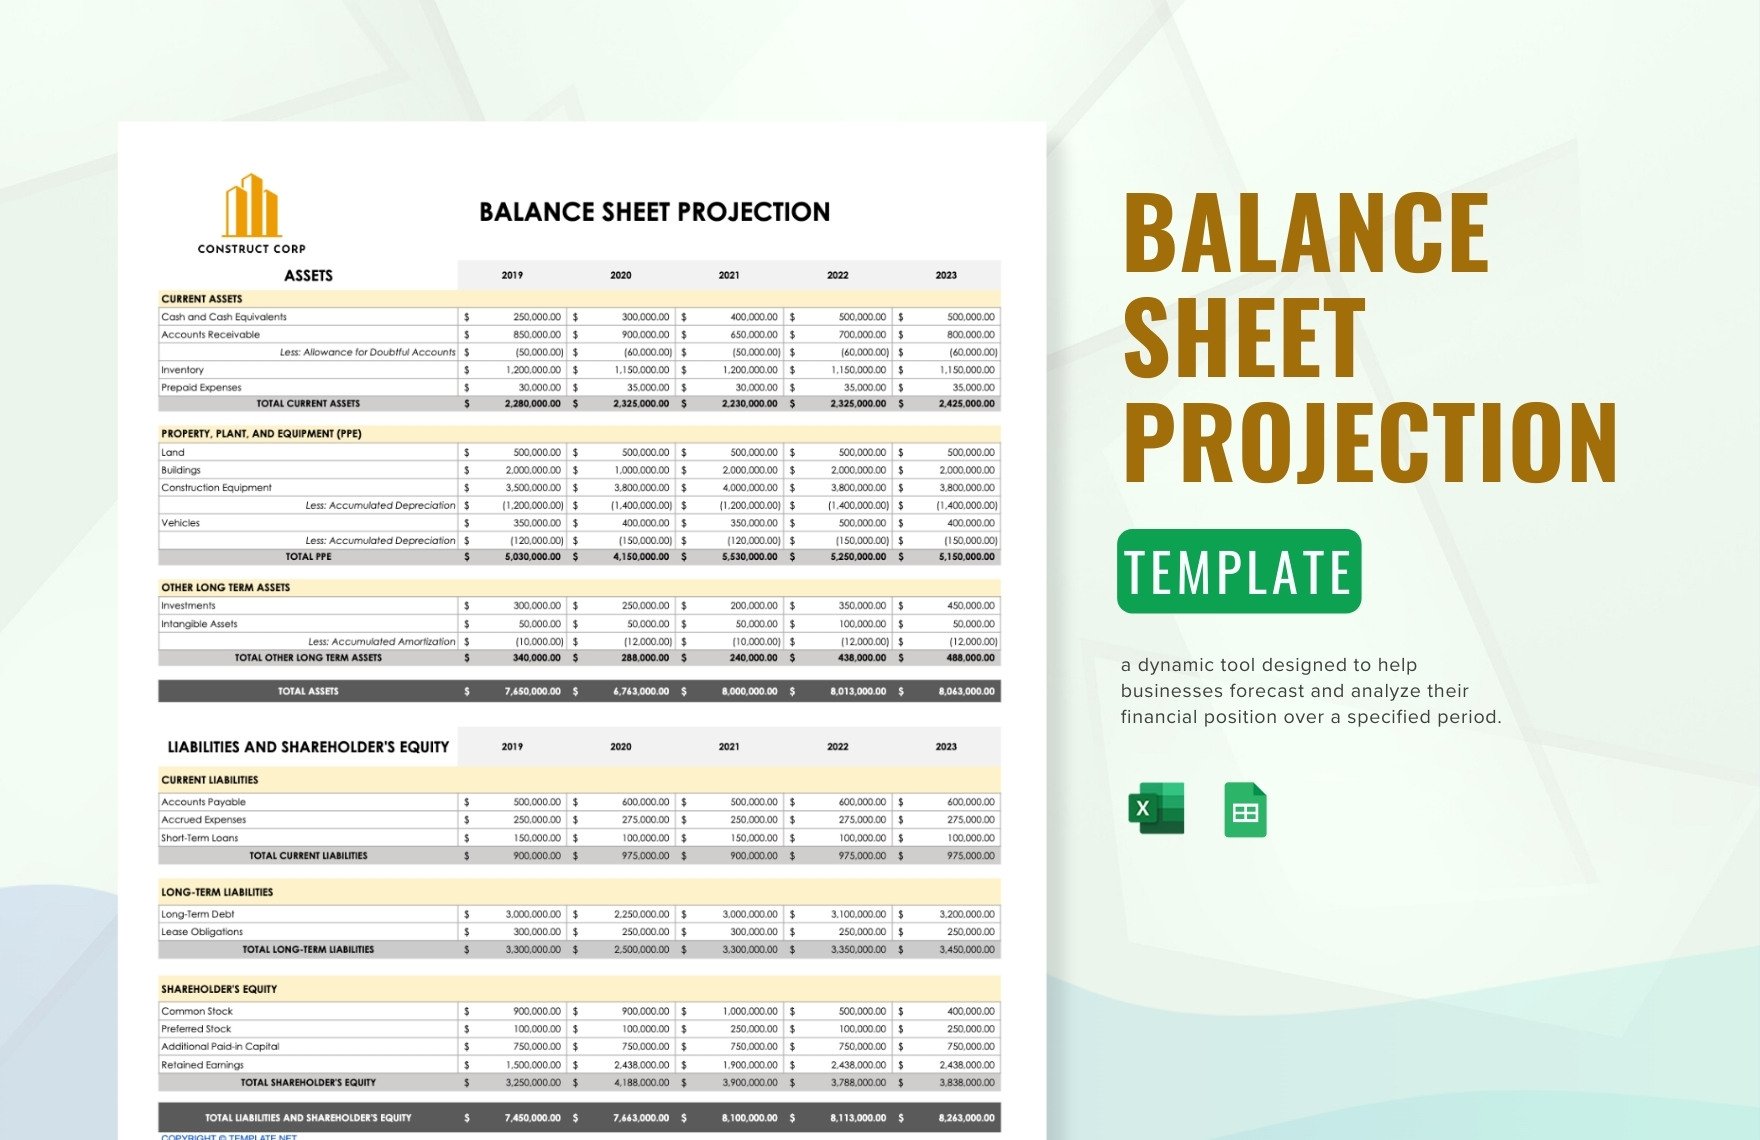 Balance Sheet Projection Template in Excel, Google Sheets